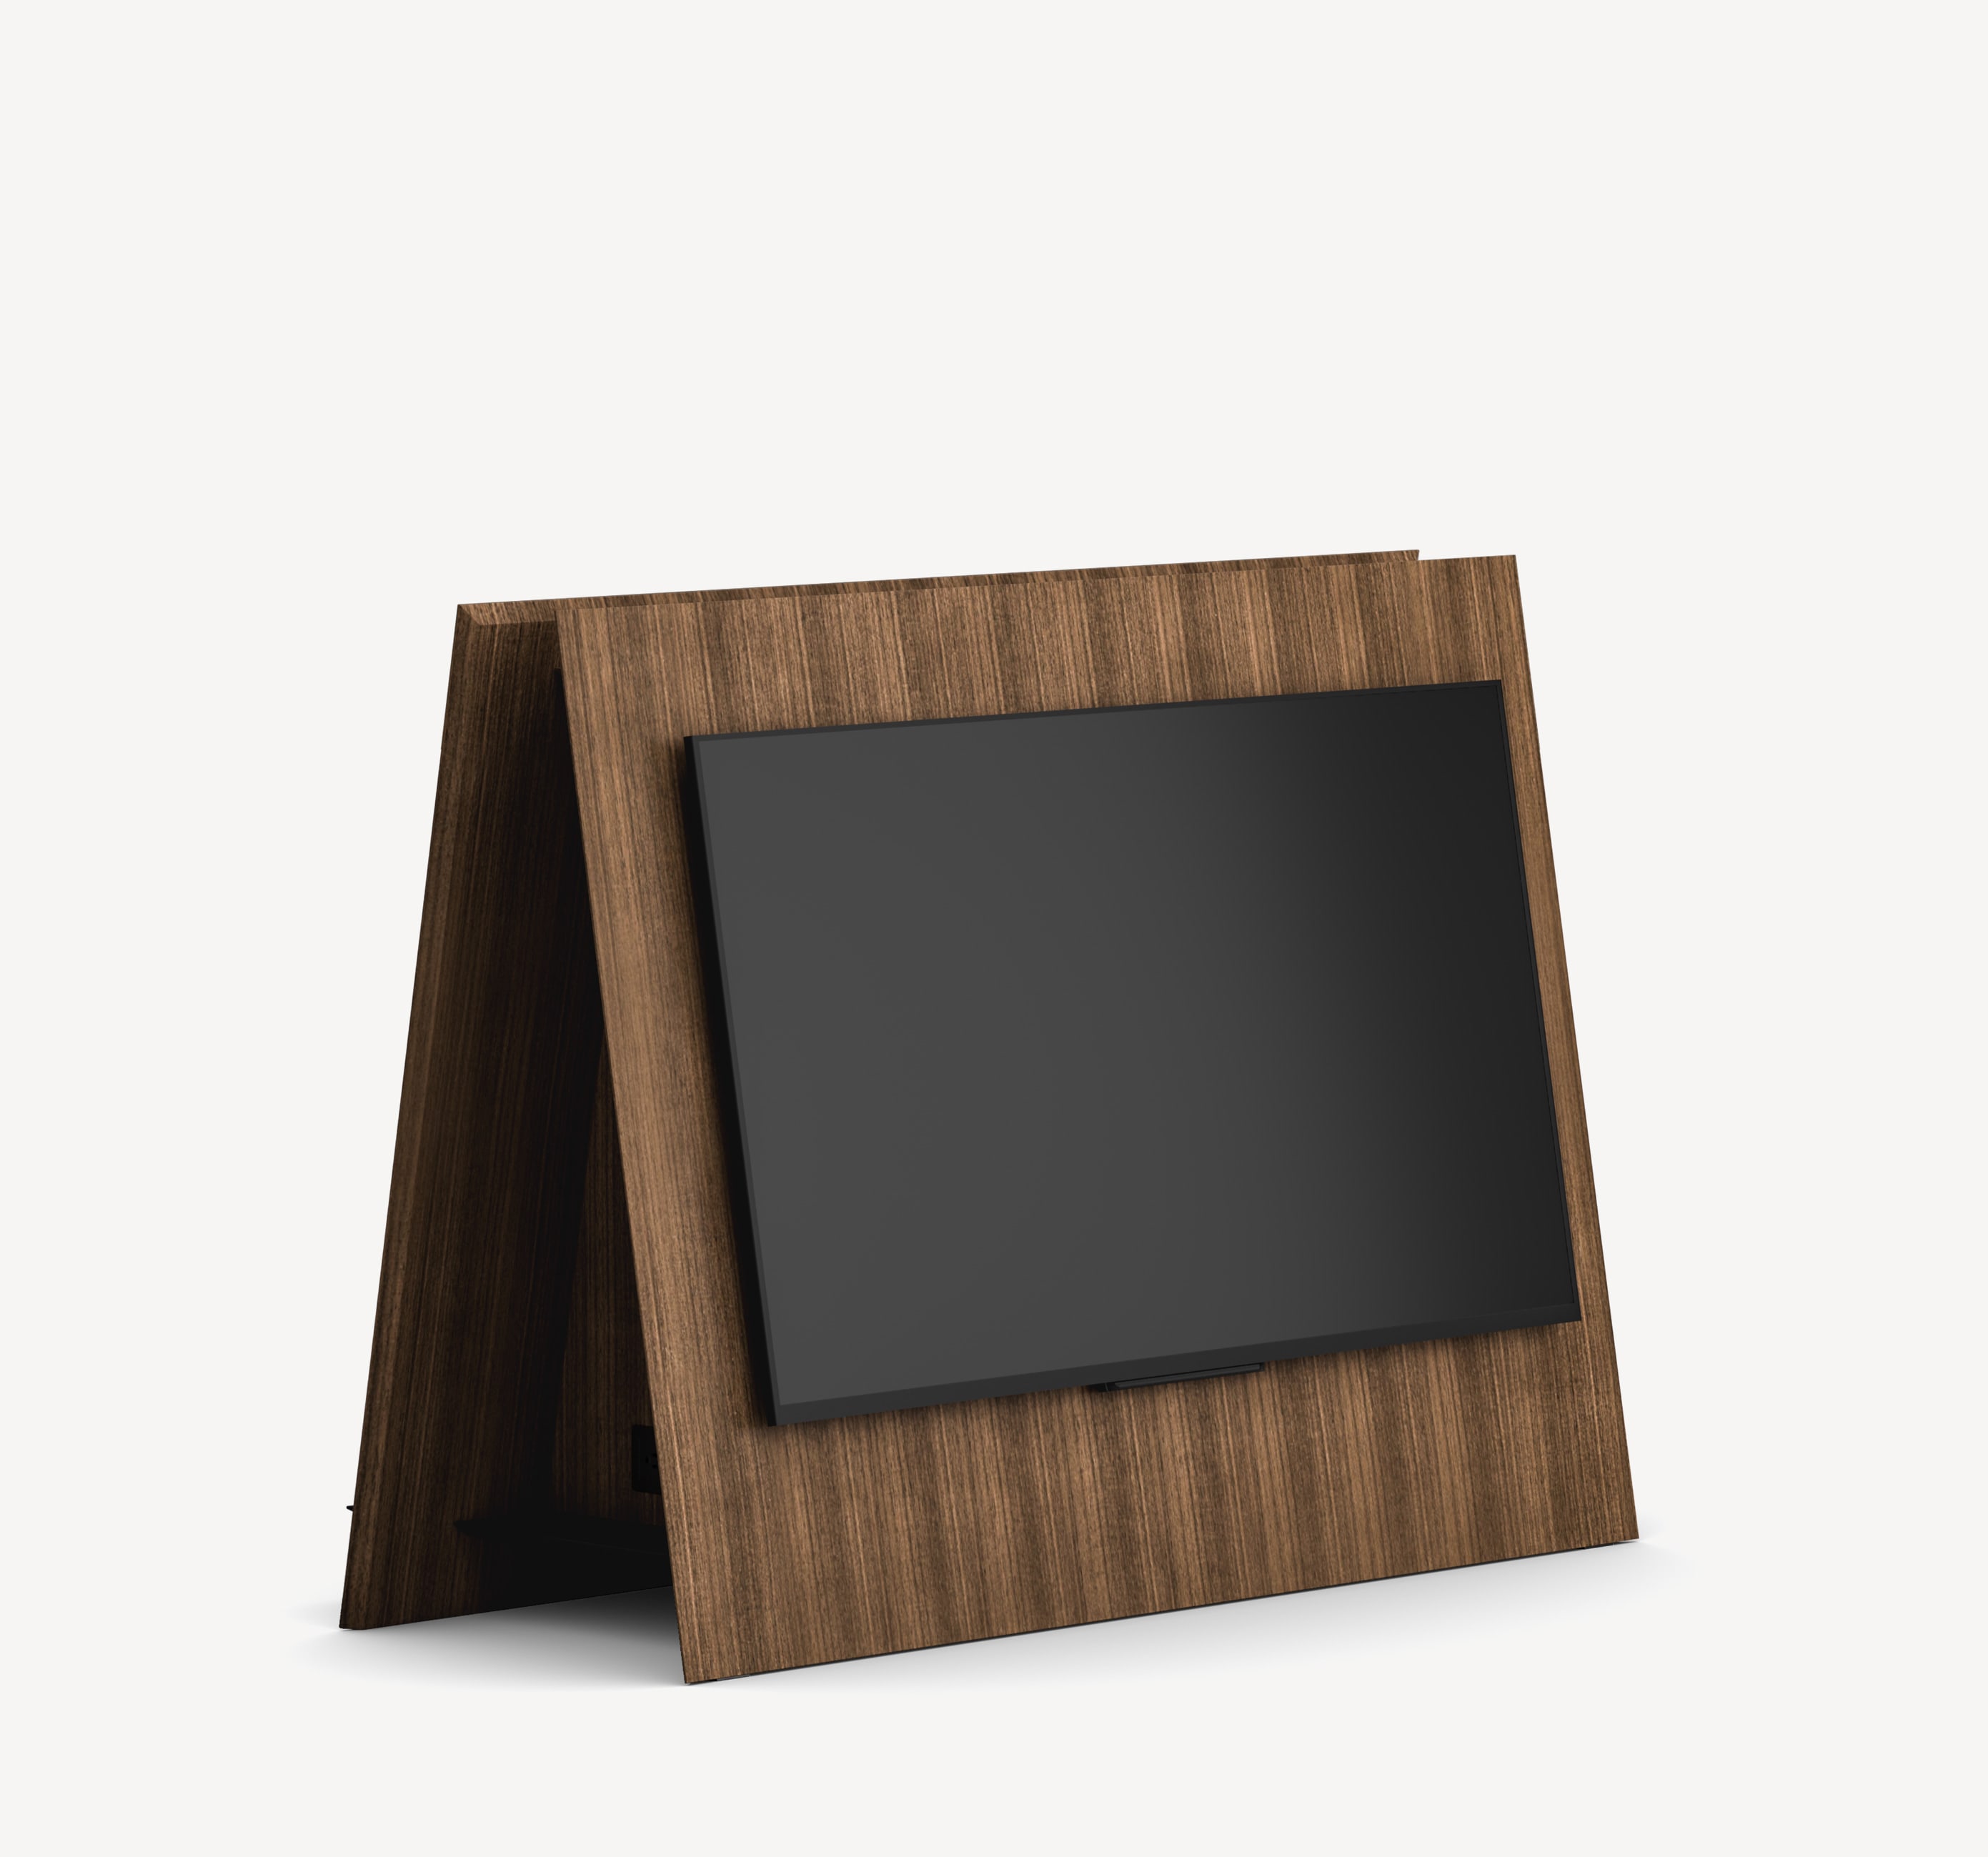 Three-quarter front view of the Gunlock Silea Lounge Level Media Unit in brown wood.